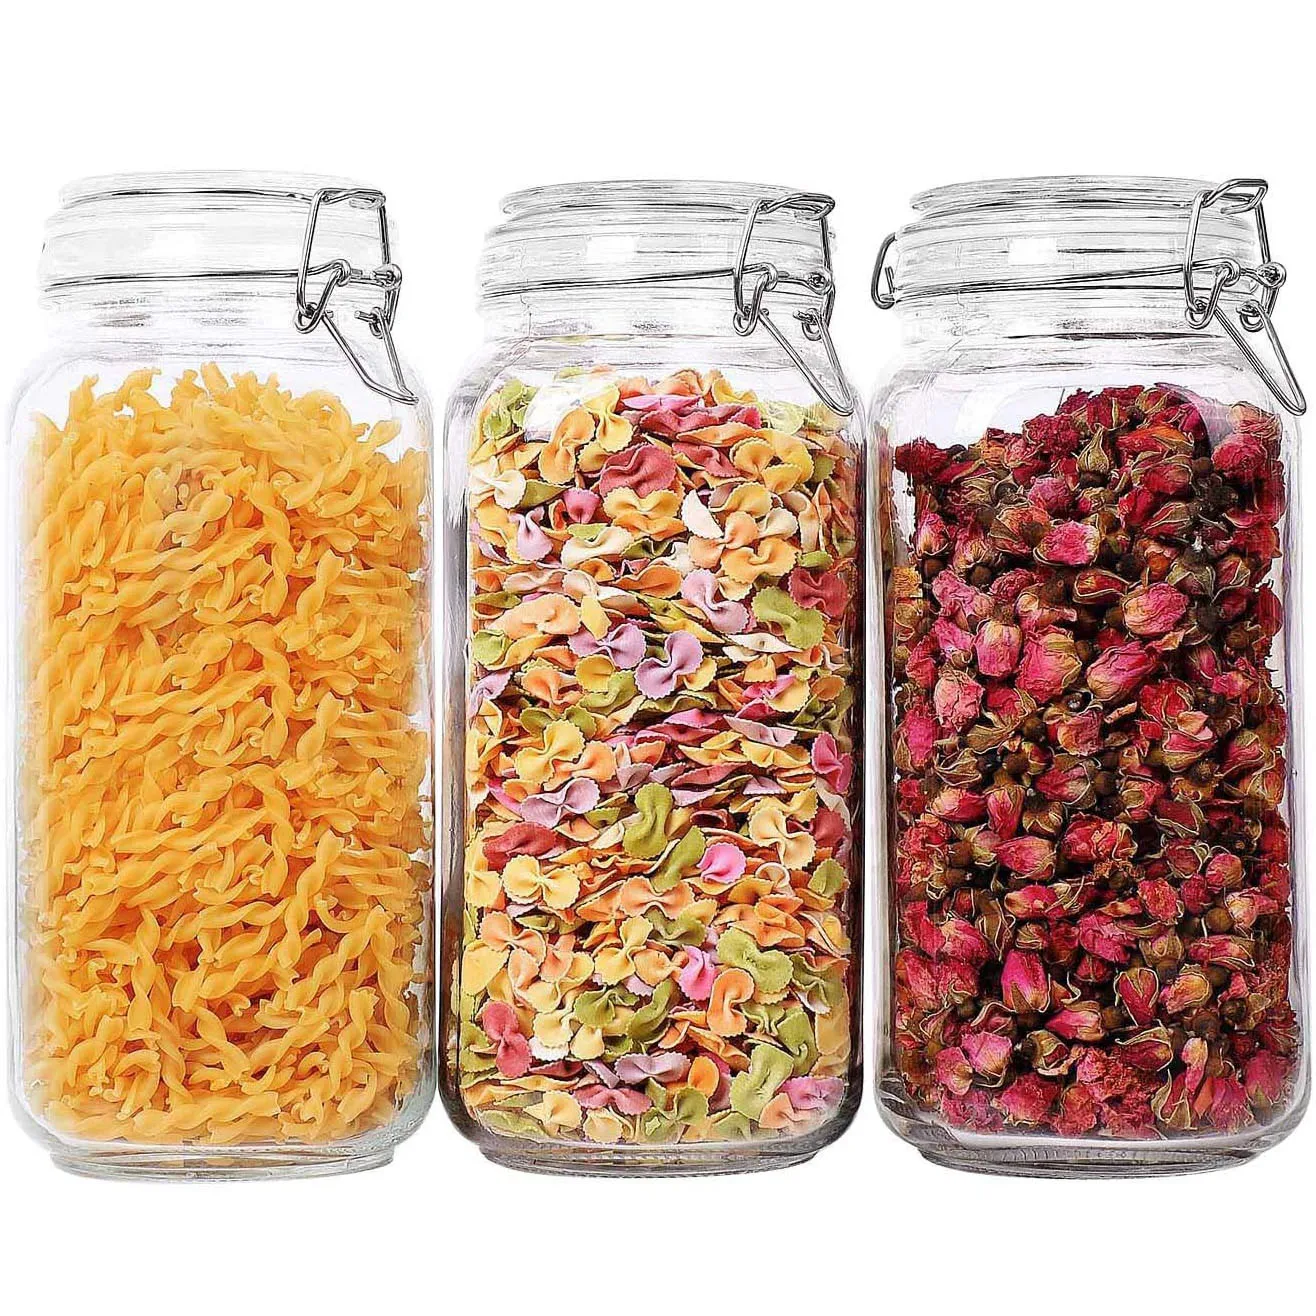 

88 oz Food Storage Jars Square - Storage Containers with Clear Sealed Cord Clip Fasteners for Kitchen Canned Cereal Pasta